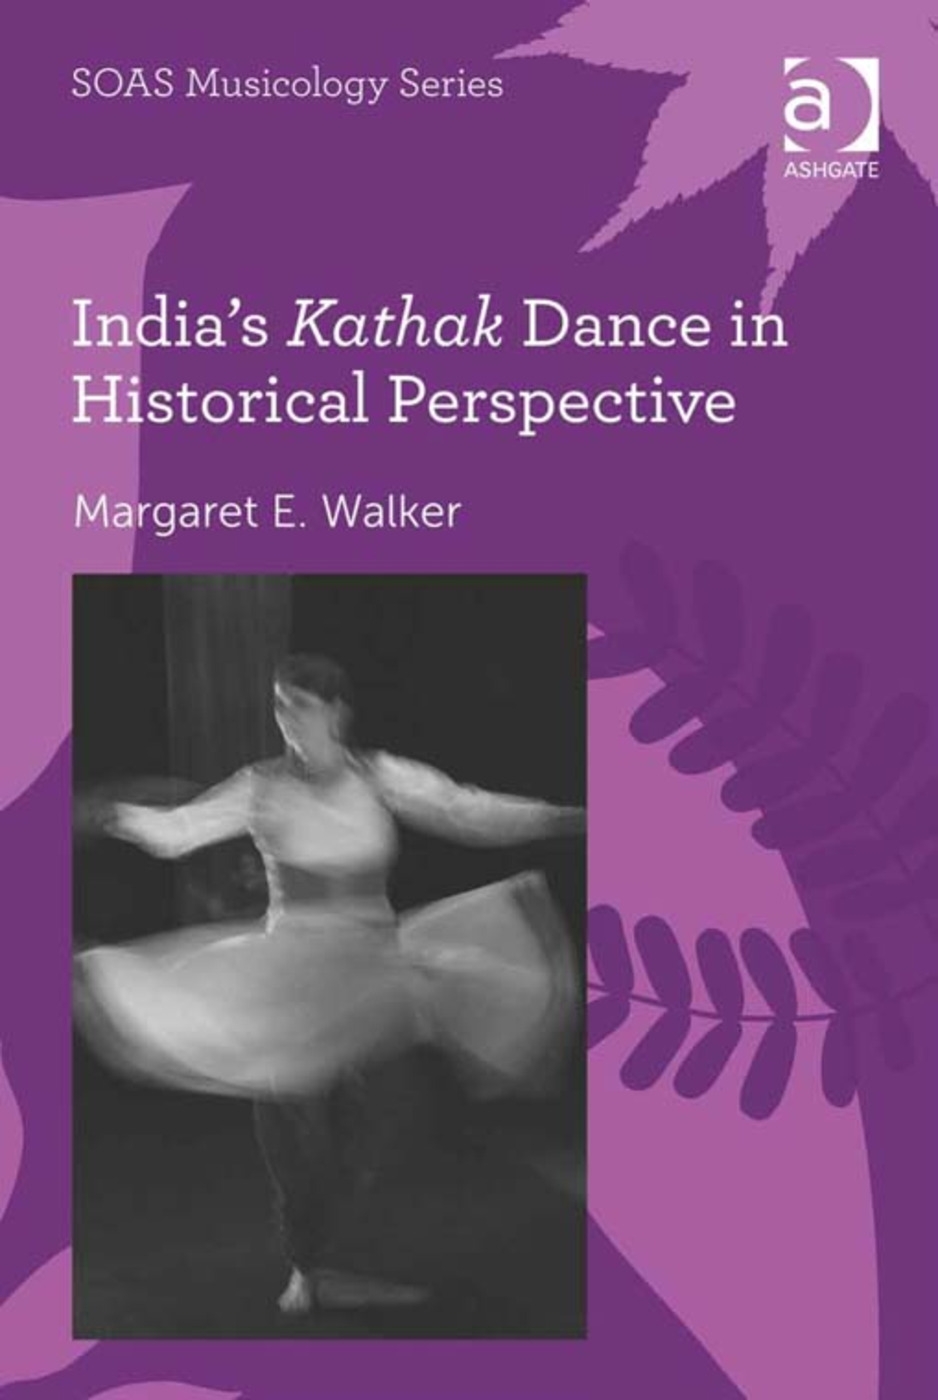 India’s Kathak Dance in Historical Perspective